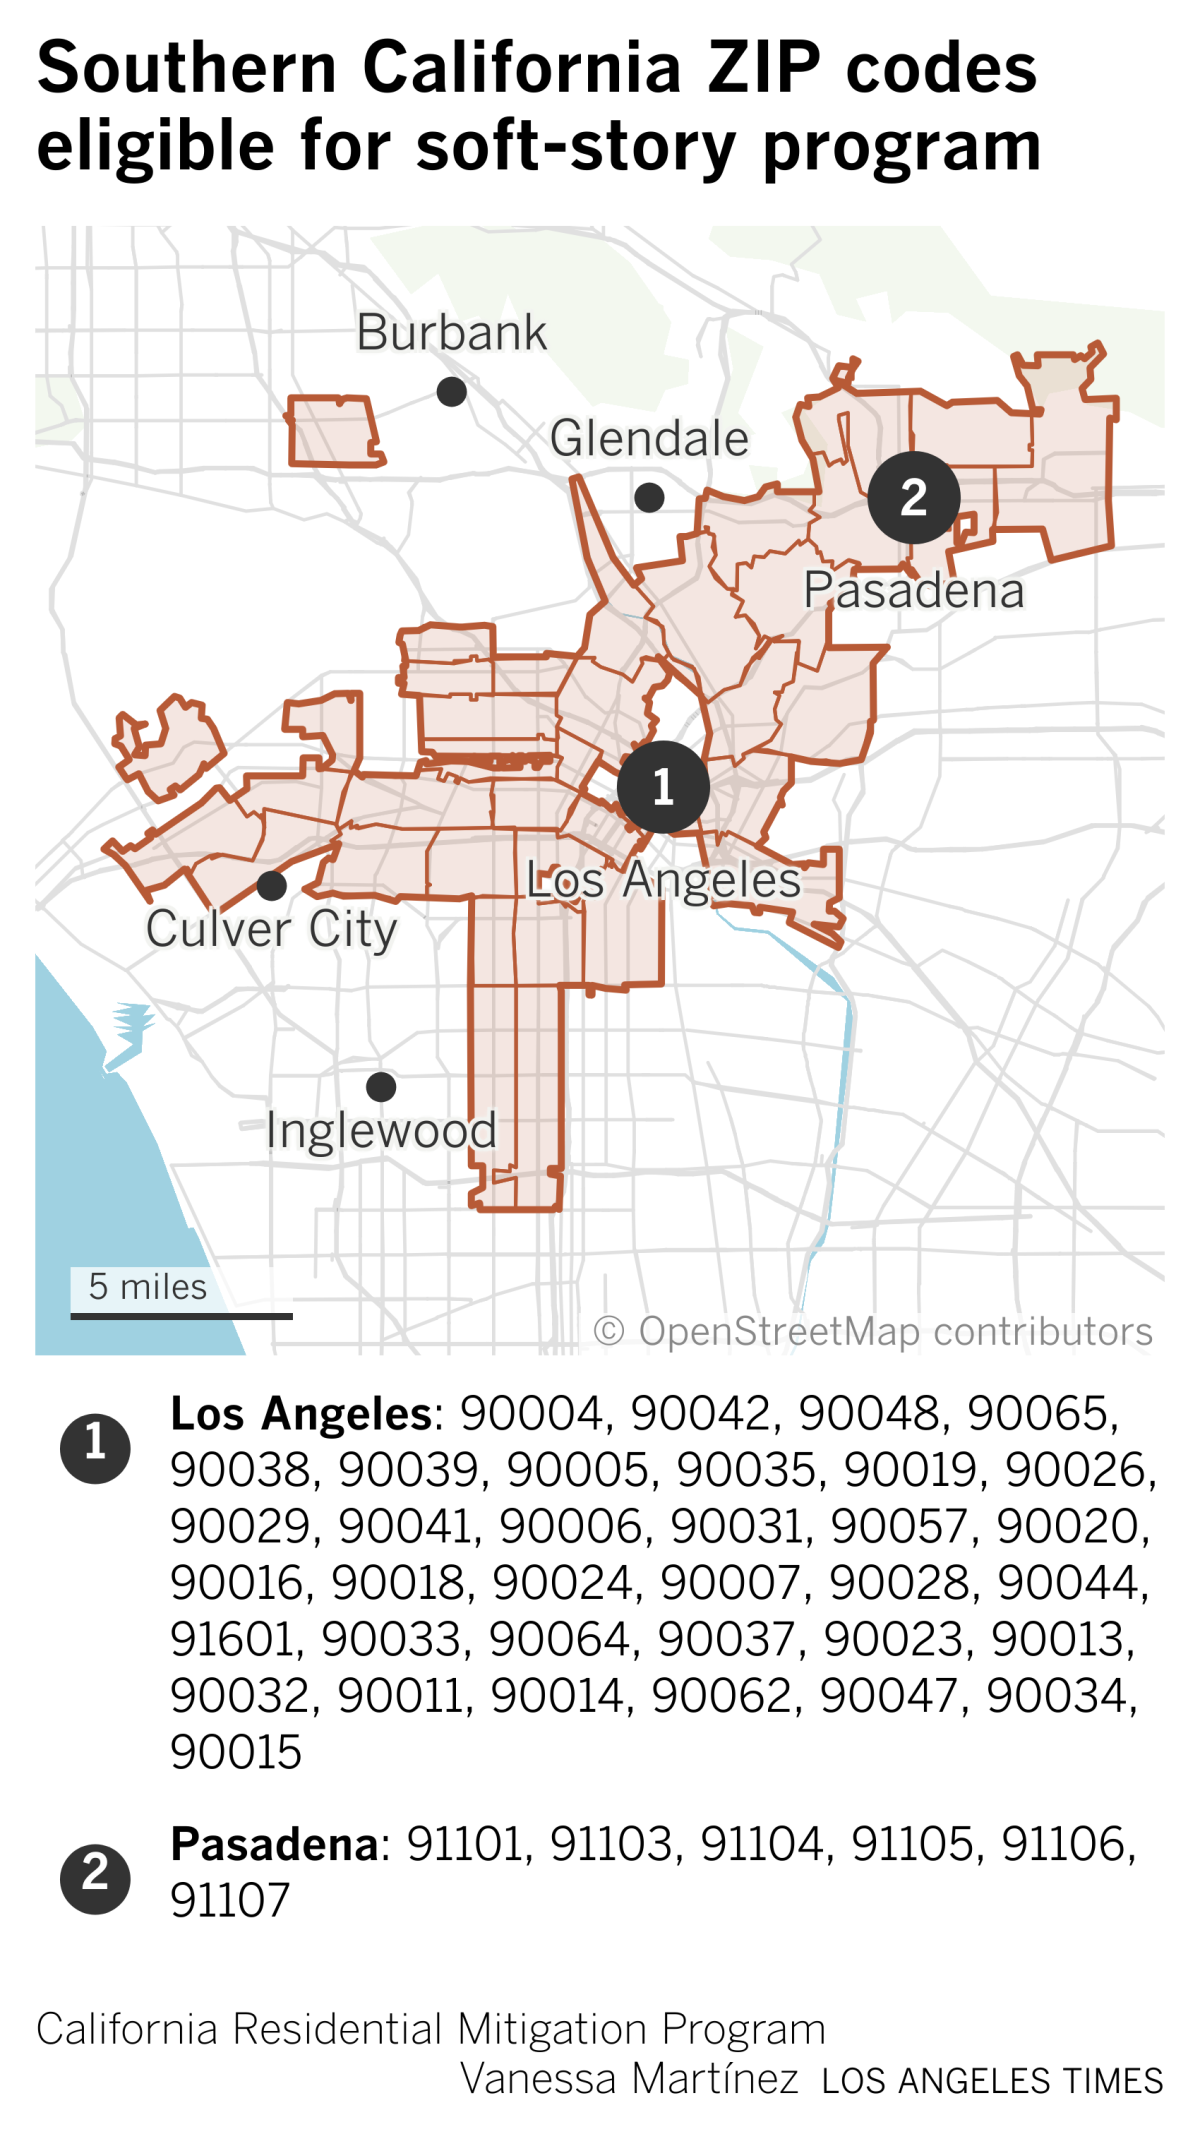 Map of zip codes in Los Angeles and Pasadena where homeowners are eligible for grants from the Earthquake Soft-Story program.